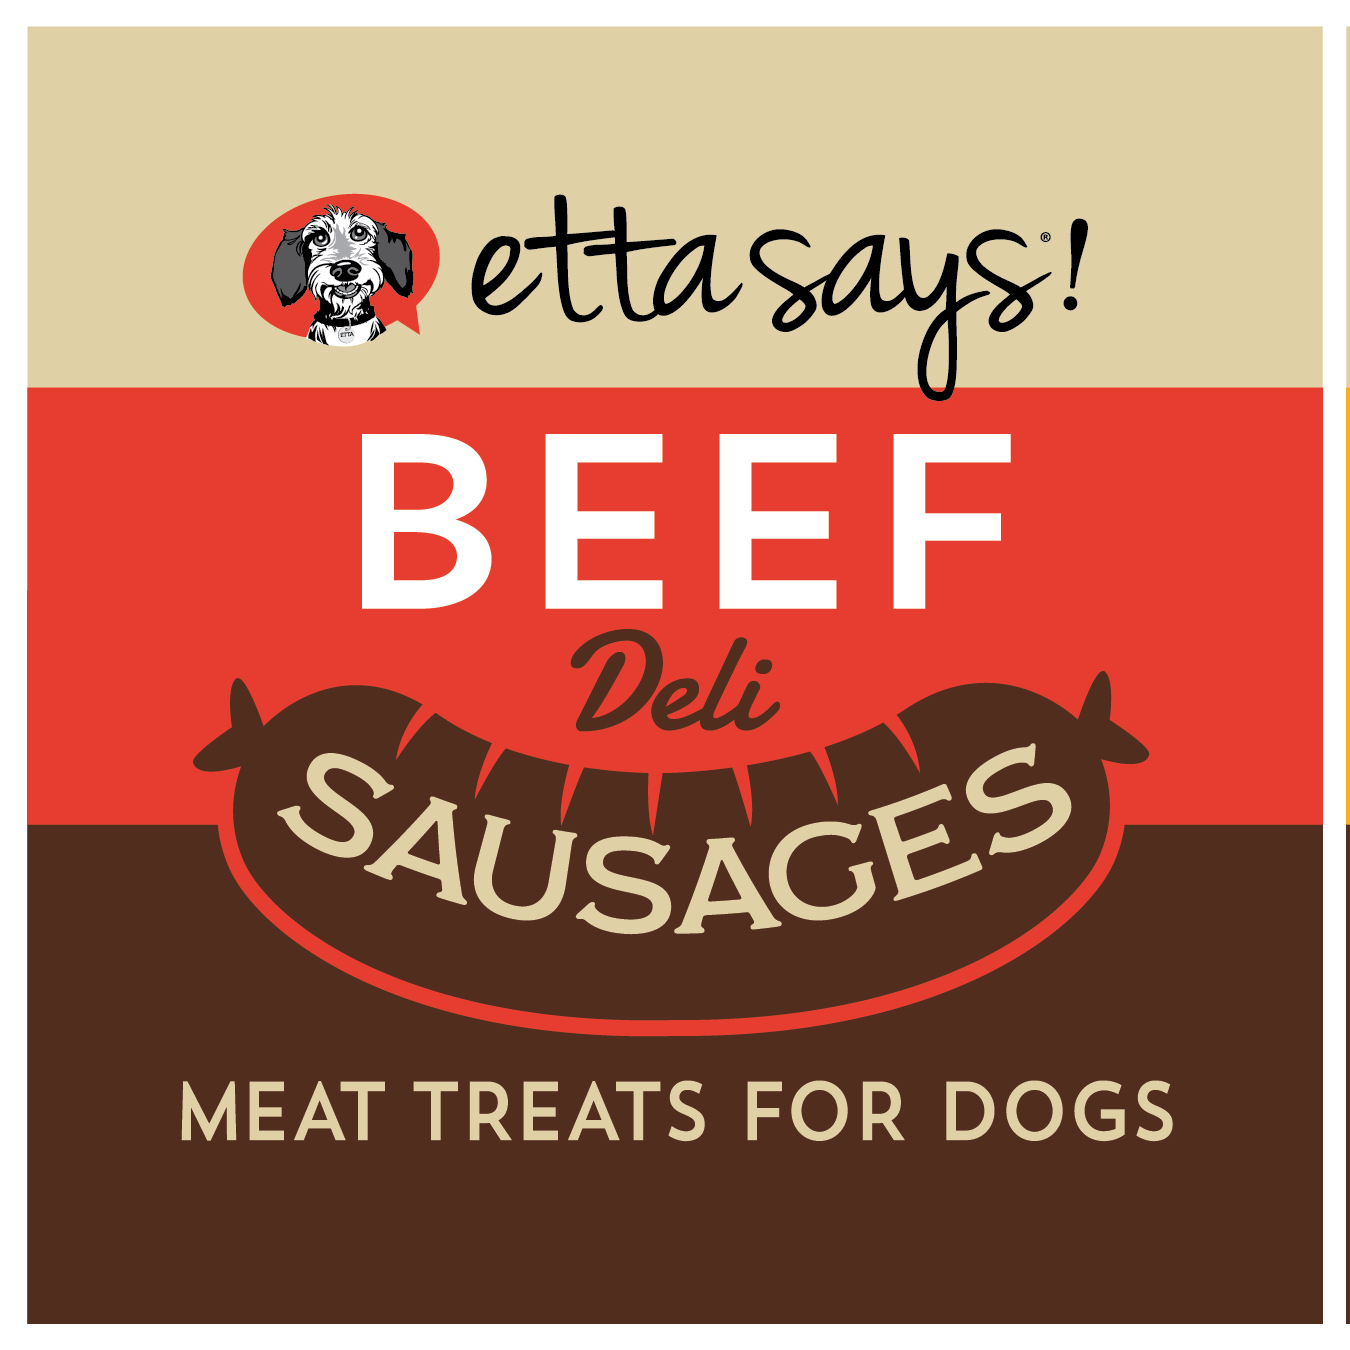 etta says Beef Sausages